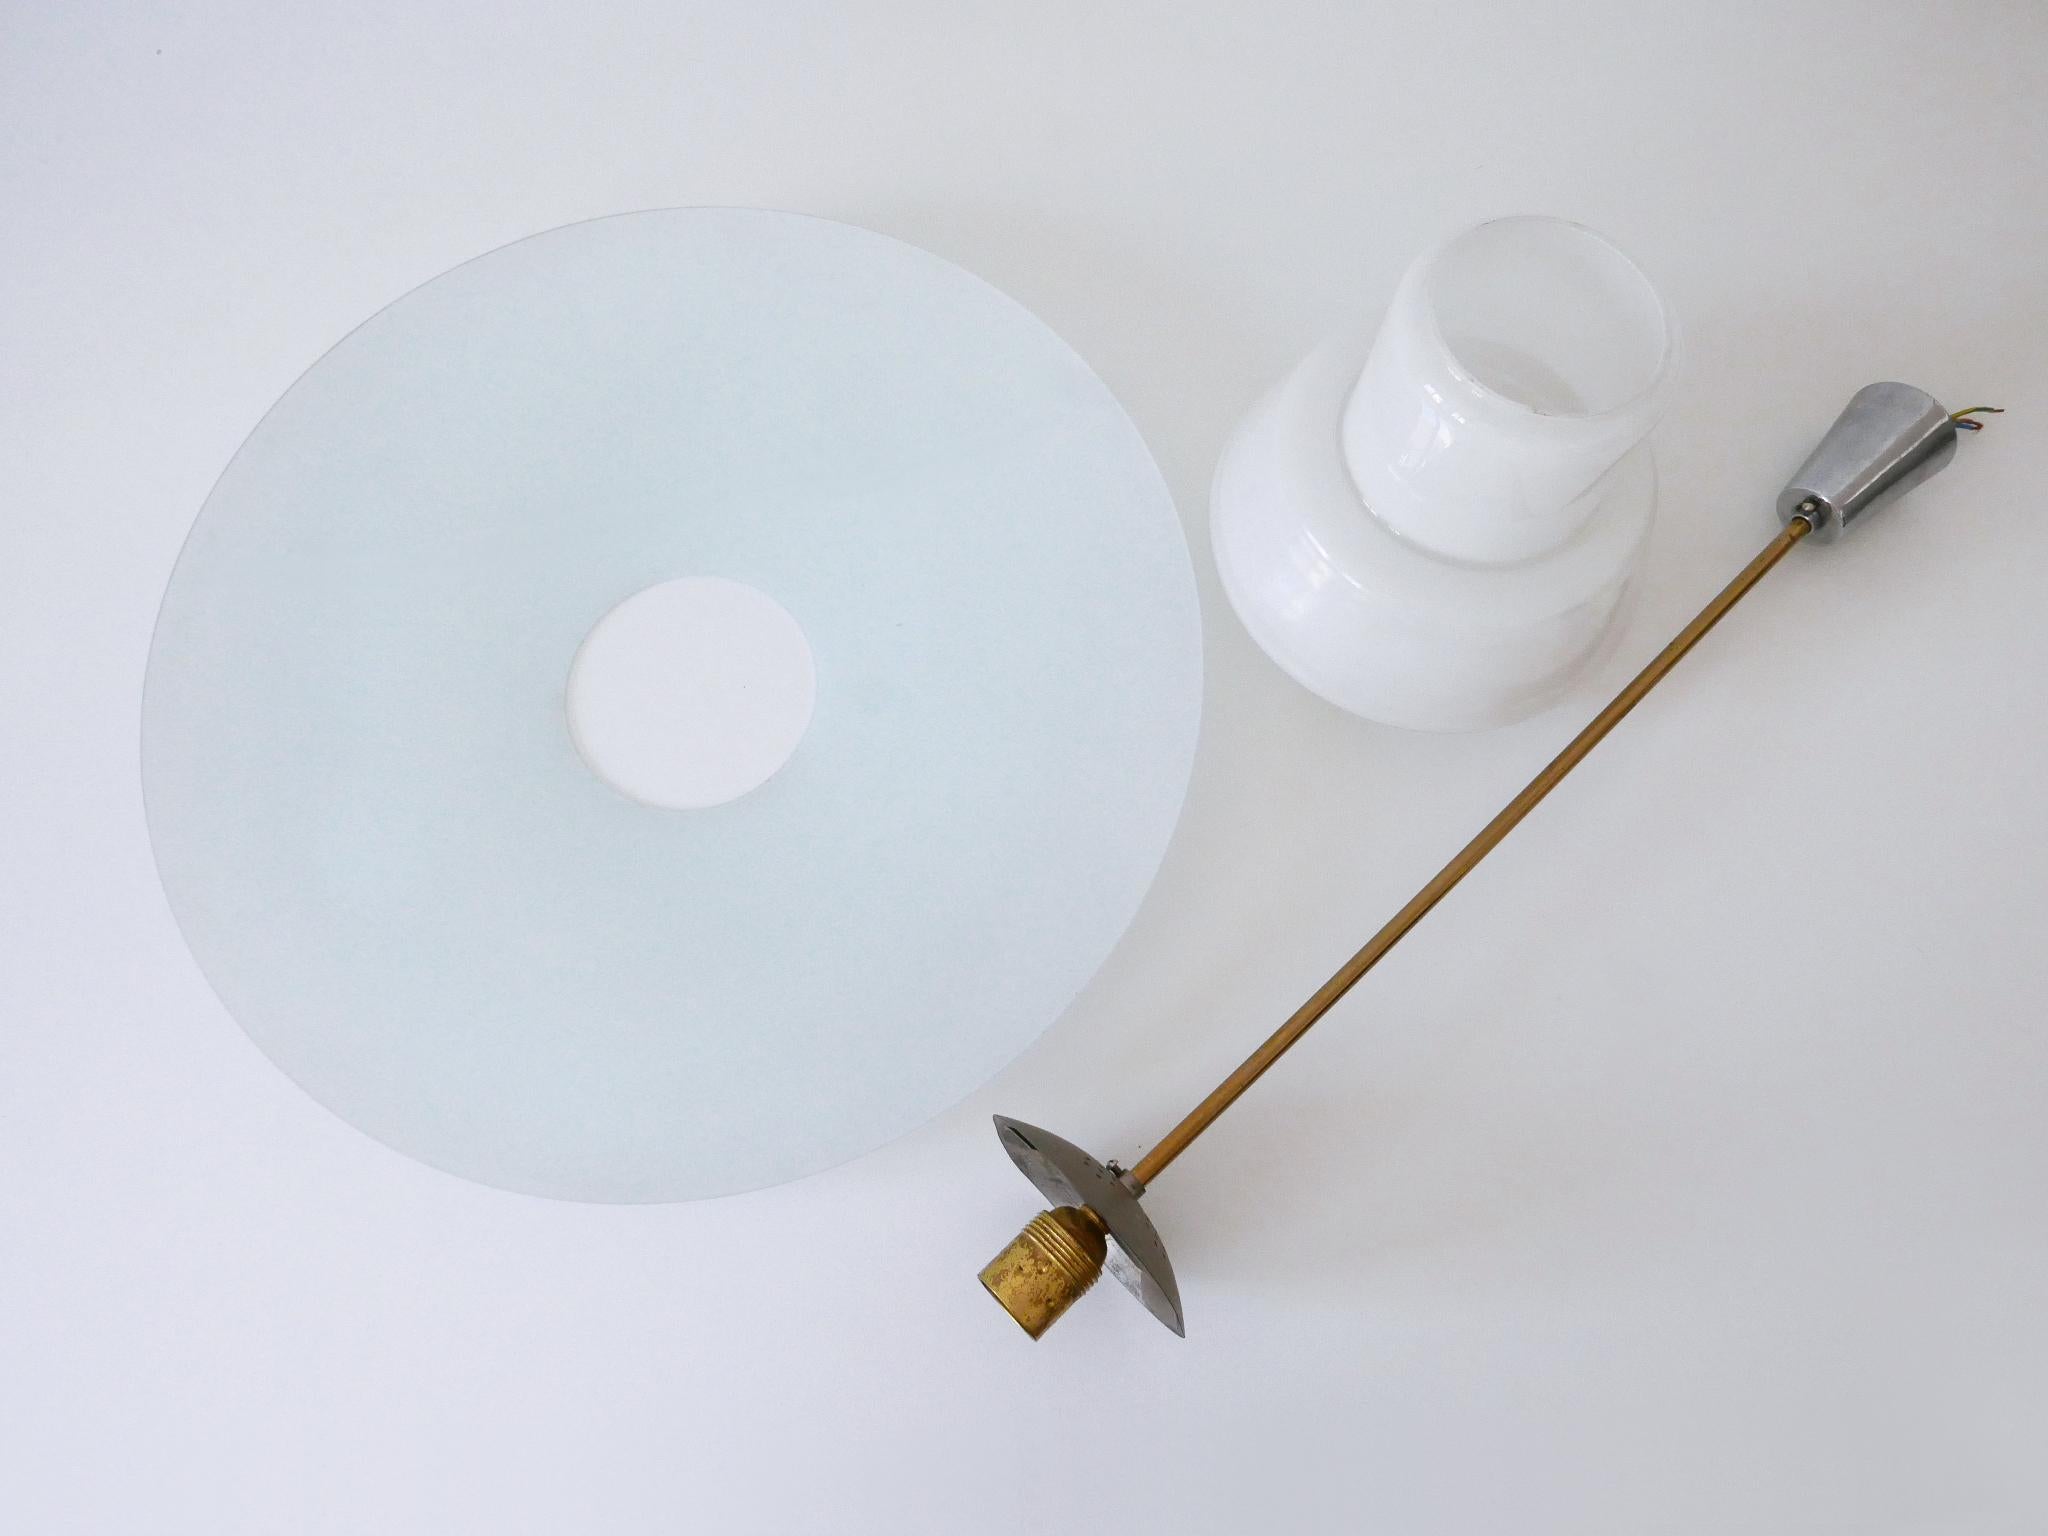 Rare Mid-Century Modern Pendant Lamp by Wolfgang Tümpel for Doria Germany 1950s For Sale 15